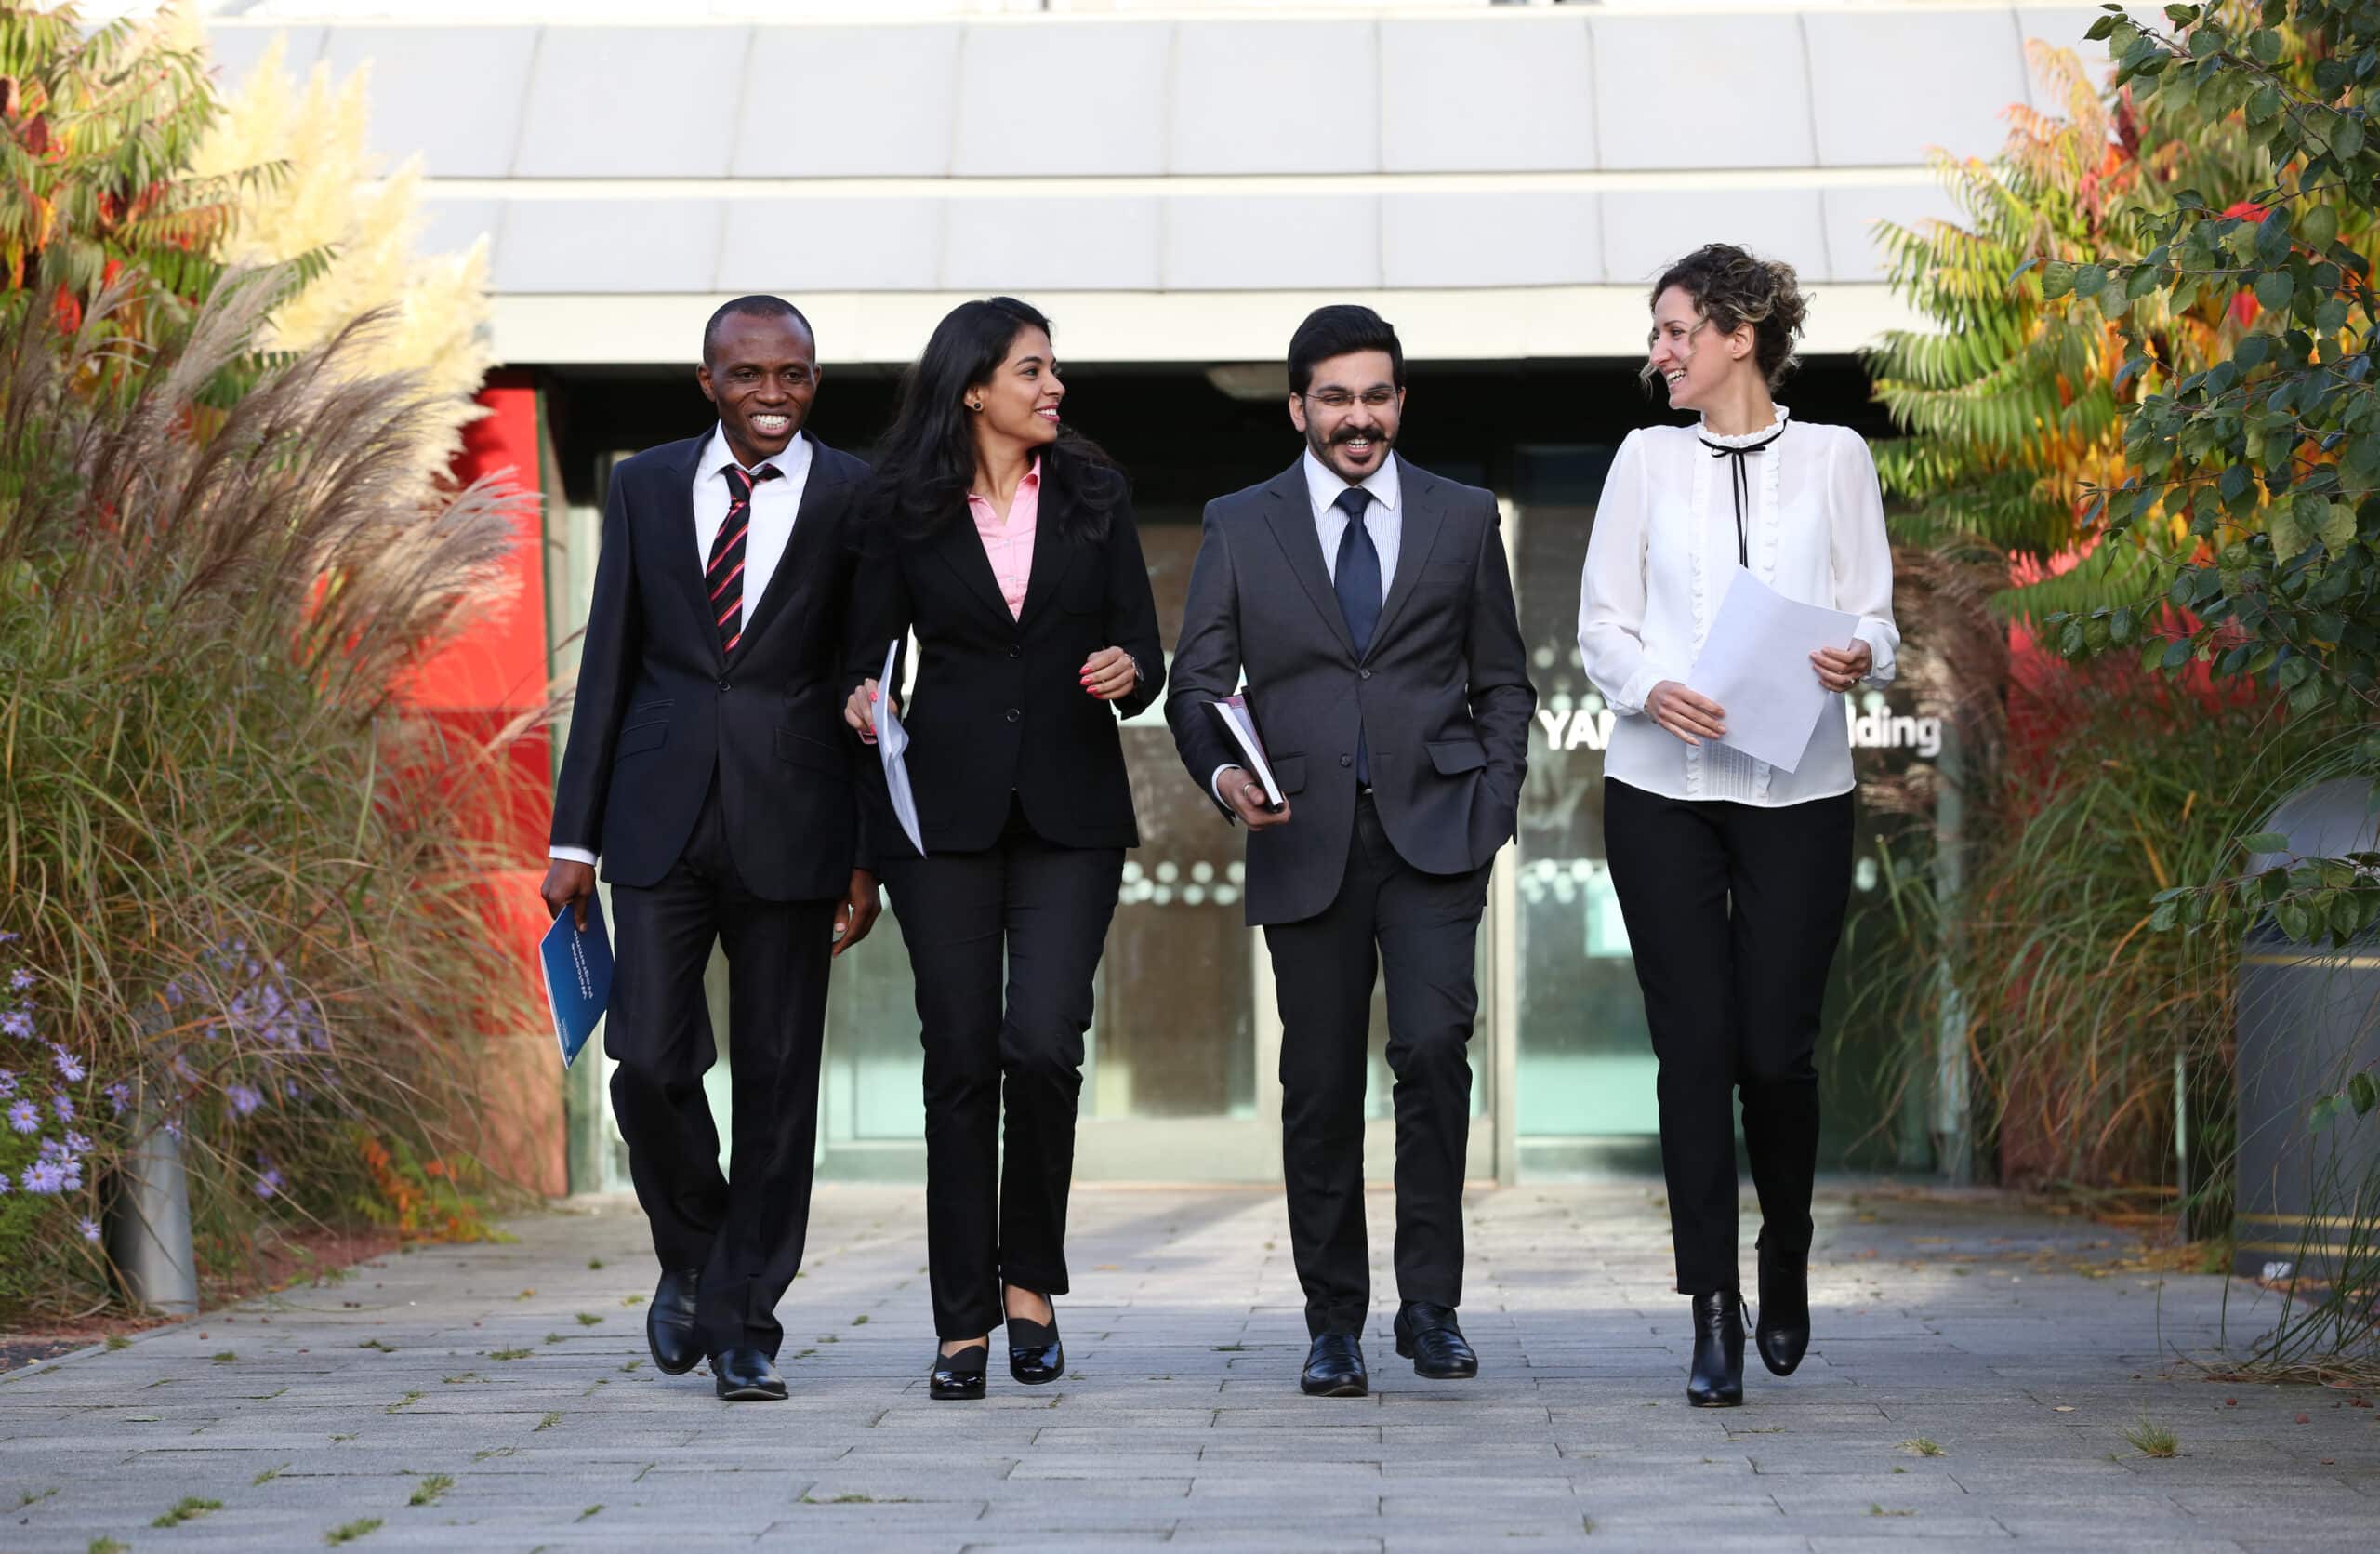 Top 5 reasons to choose the Nottingham University Business School MBA